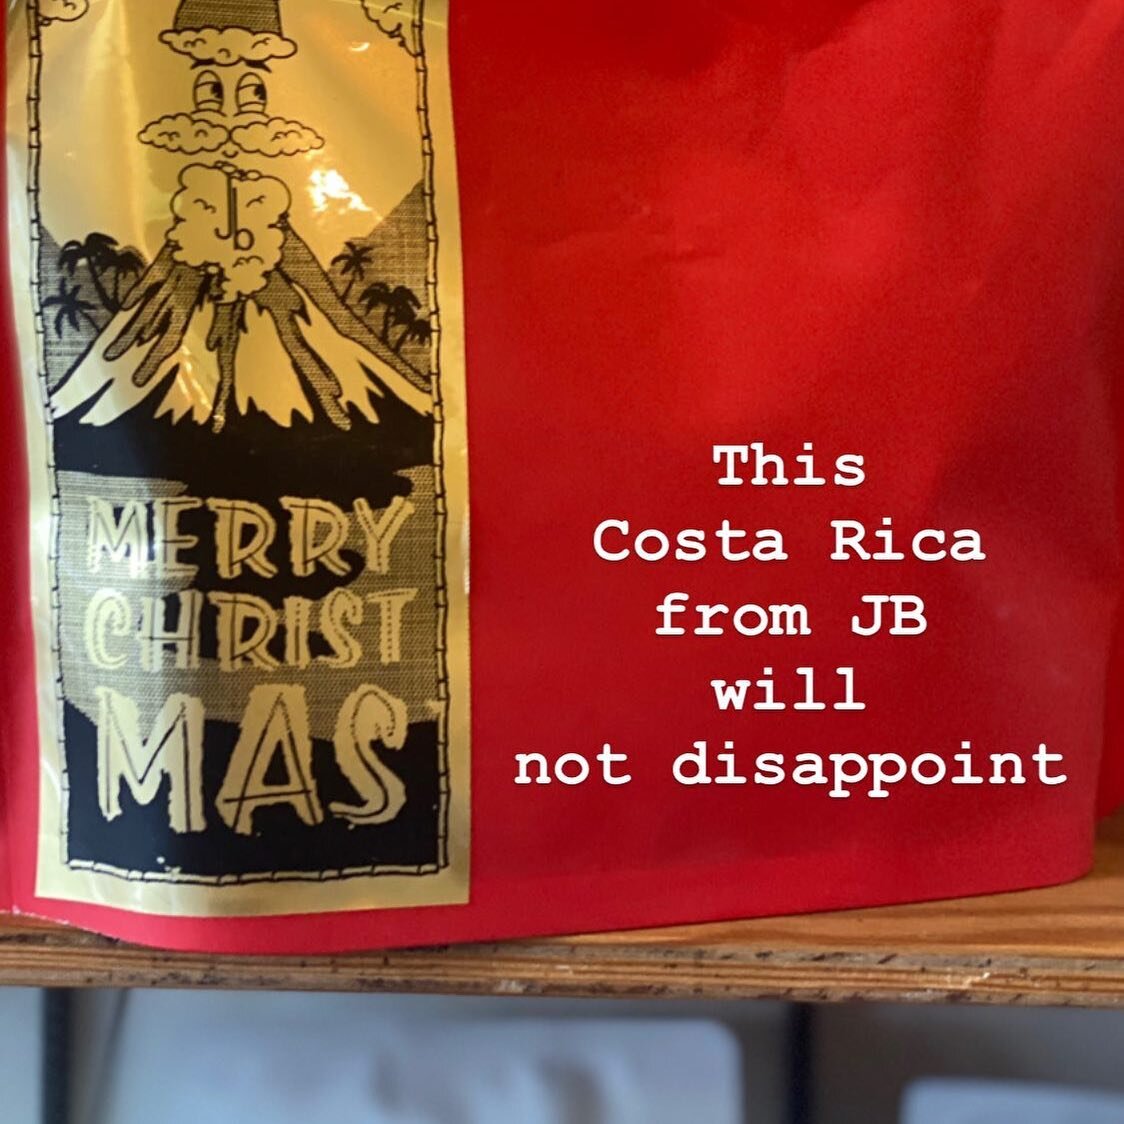 Yule is creeping on, and we&rsquo;ve got the right bag for fruity and sweet people.
XMAS coffee by JB: 
Costa Rica 
- natural process fruit punch slightly boozy caramel yums